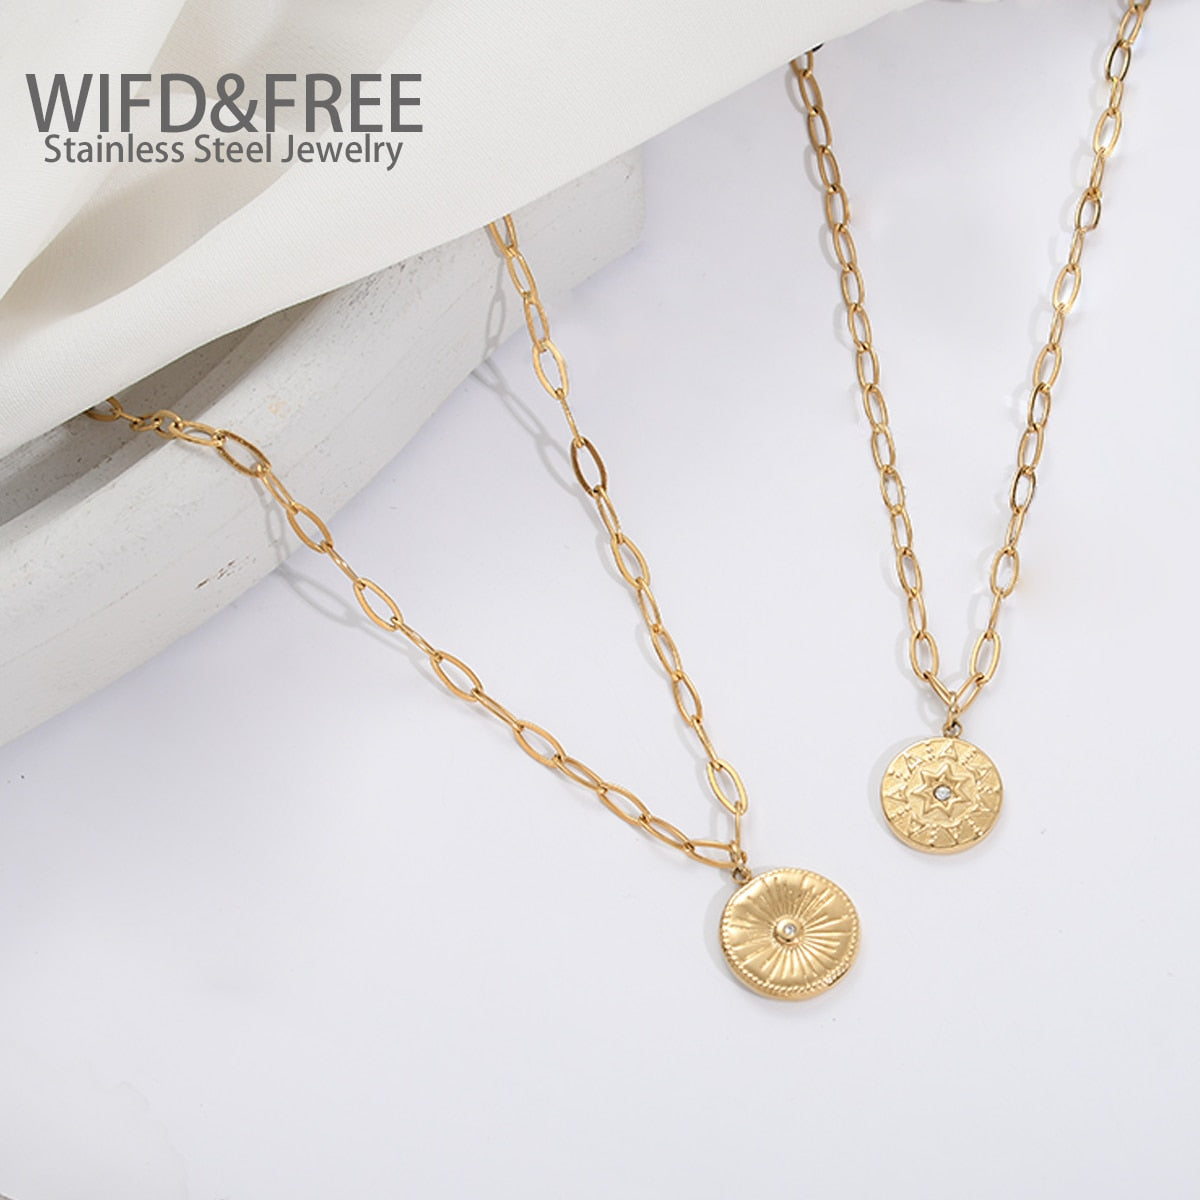 Wild & Free Necklace for Women